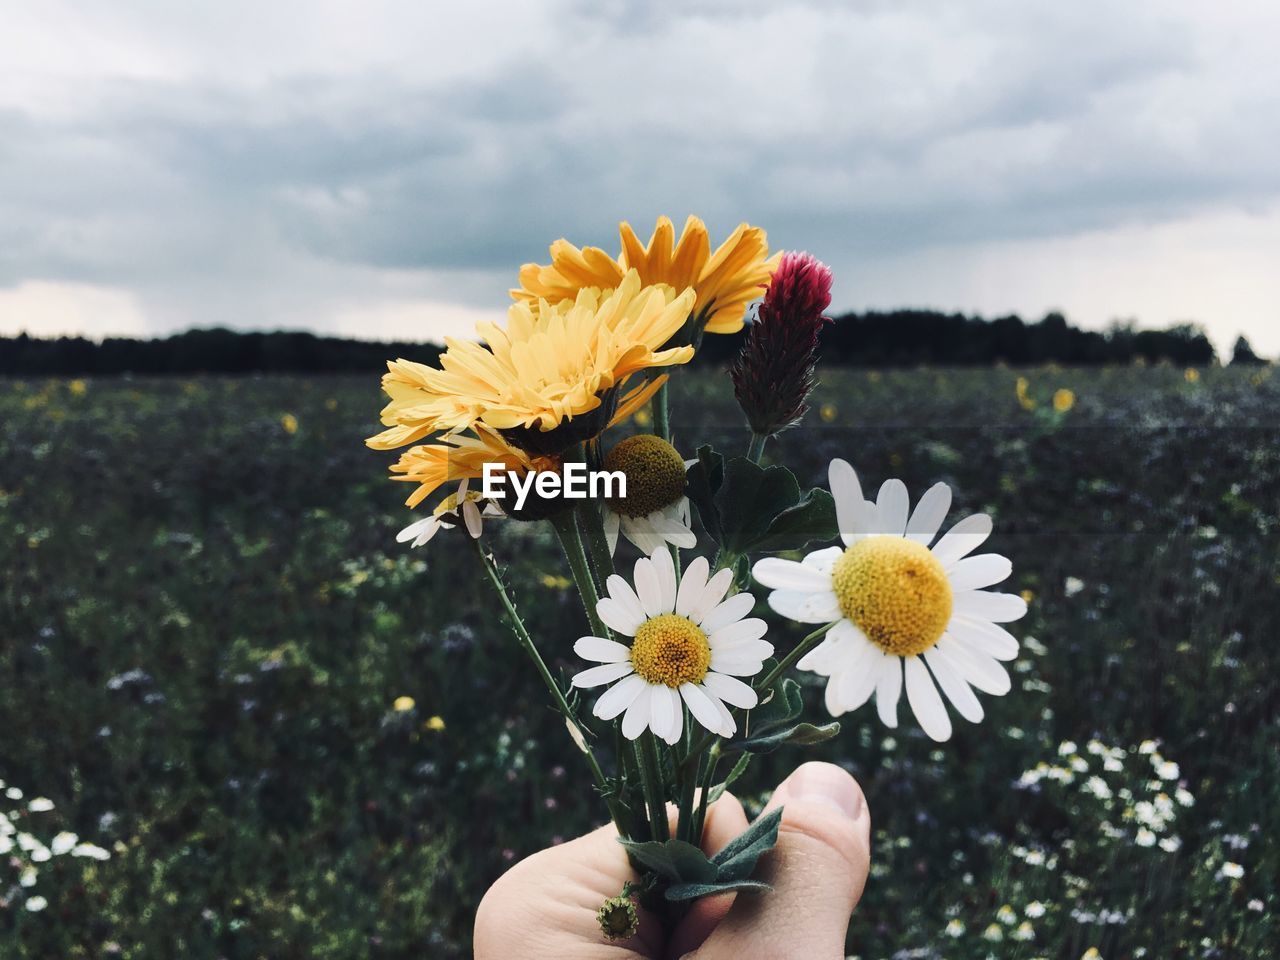 Cropped hand holding flowers over grassy field against cloudy sky